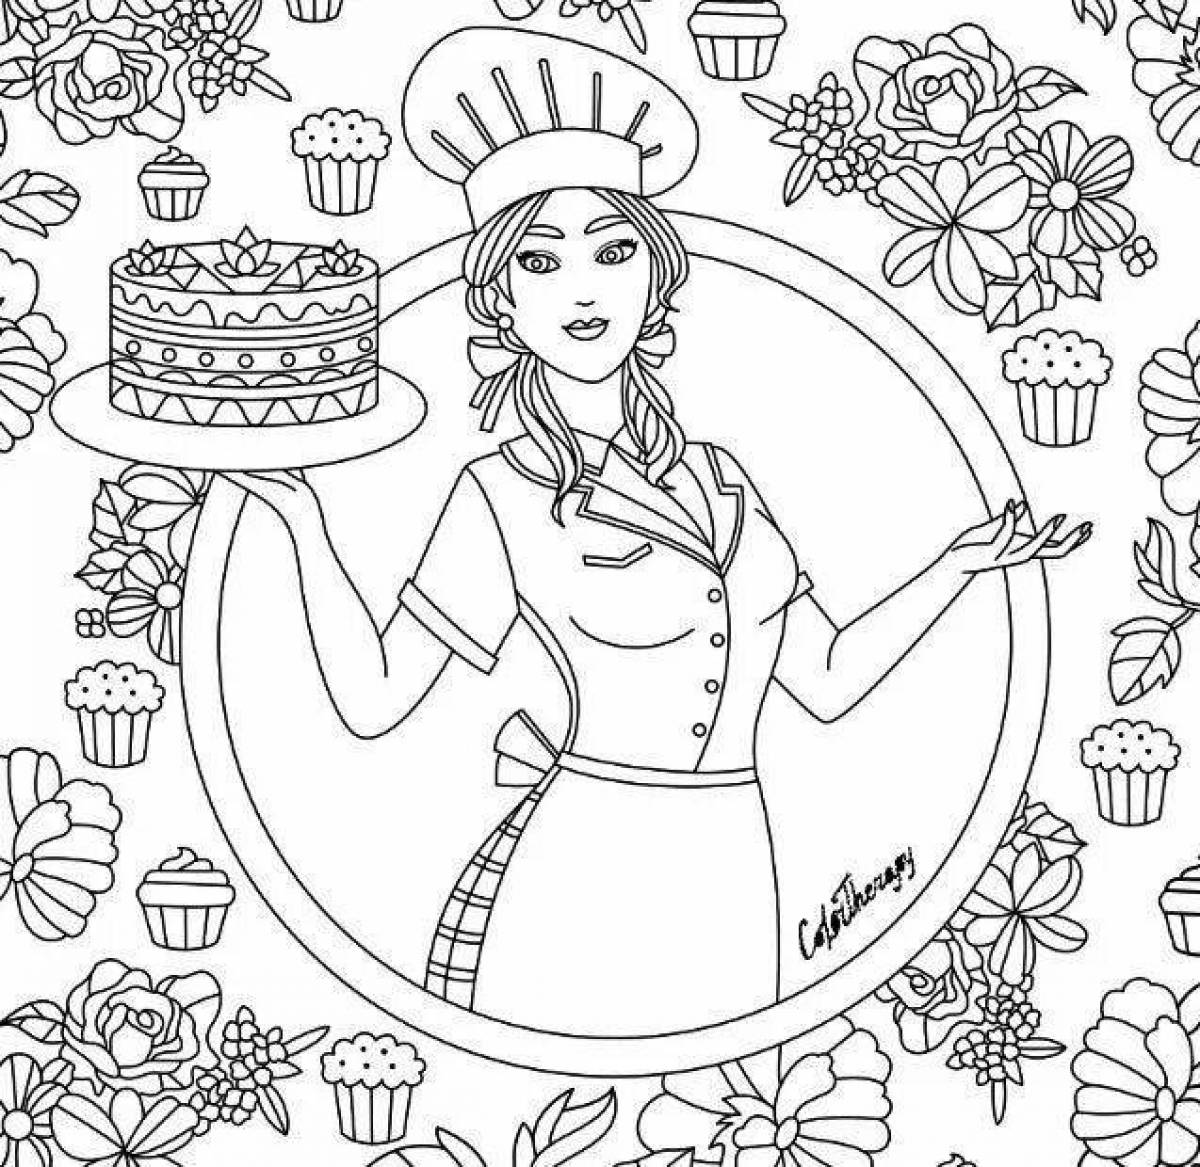 Innovative confectionery coloring book for kids